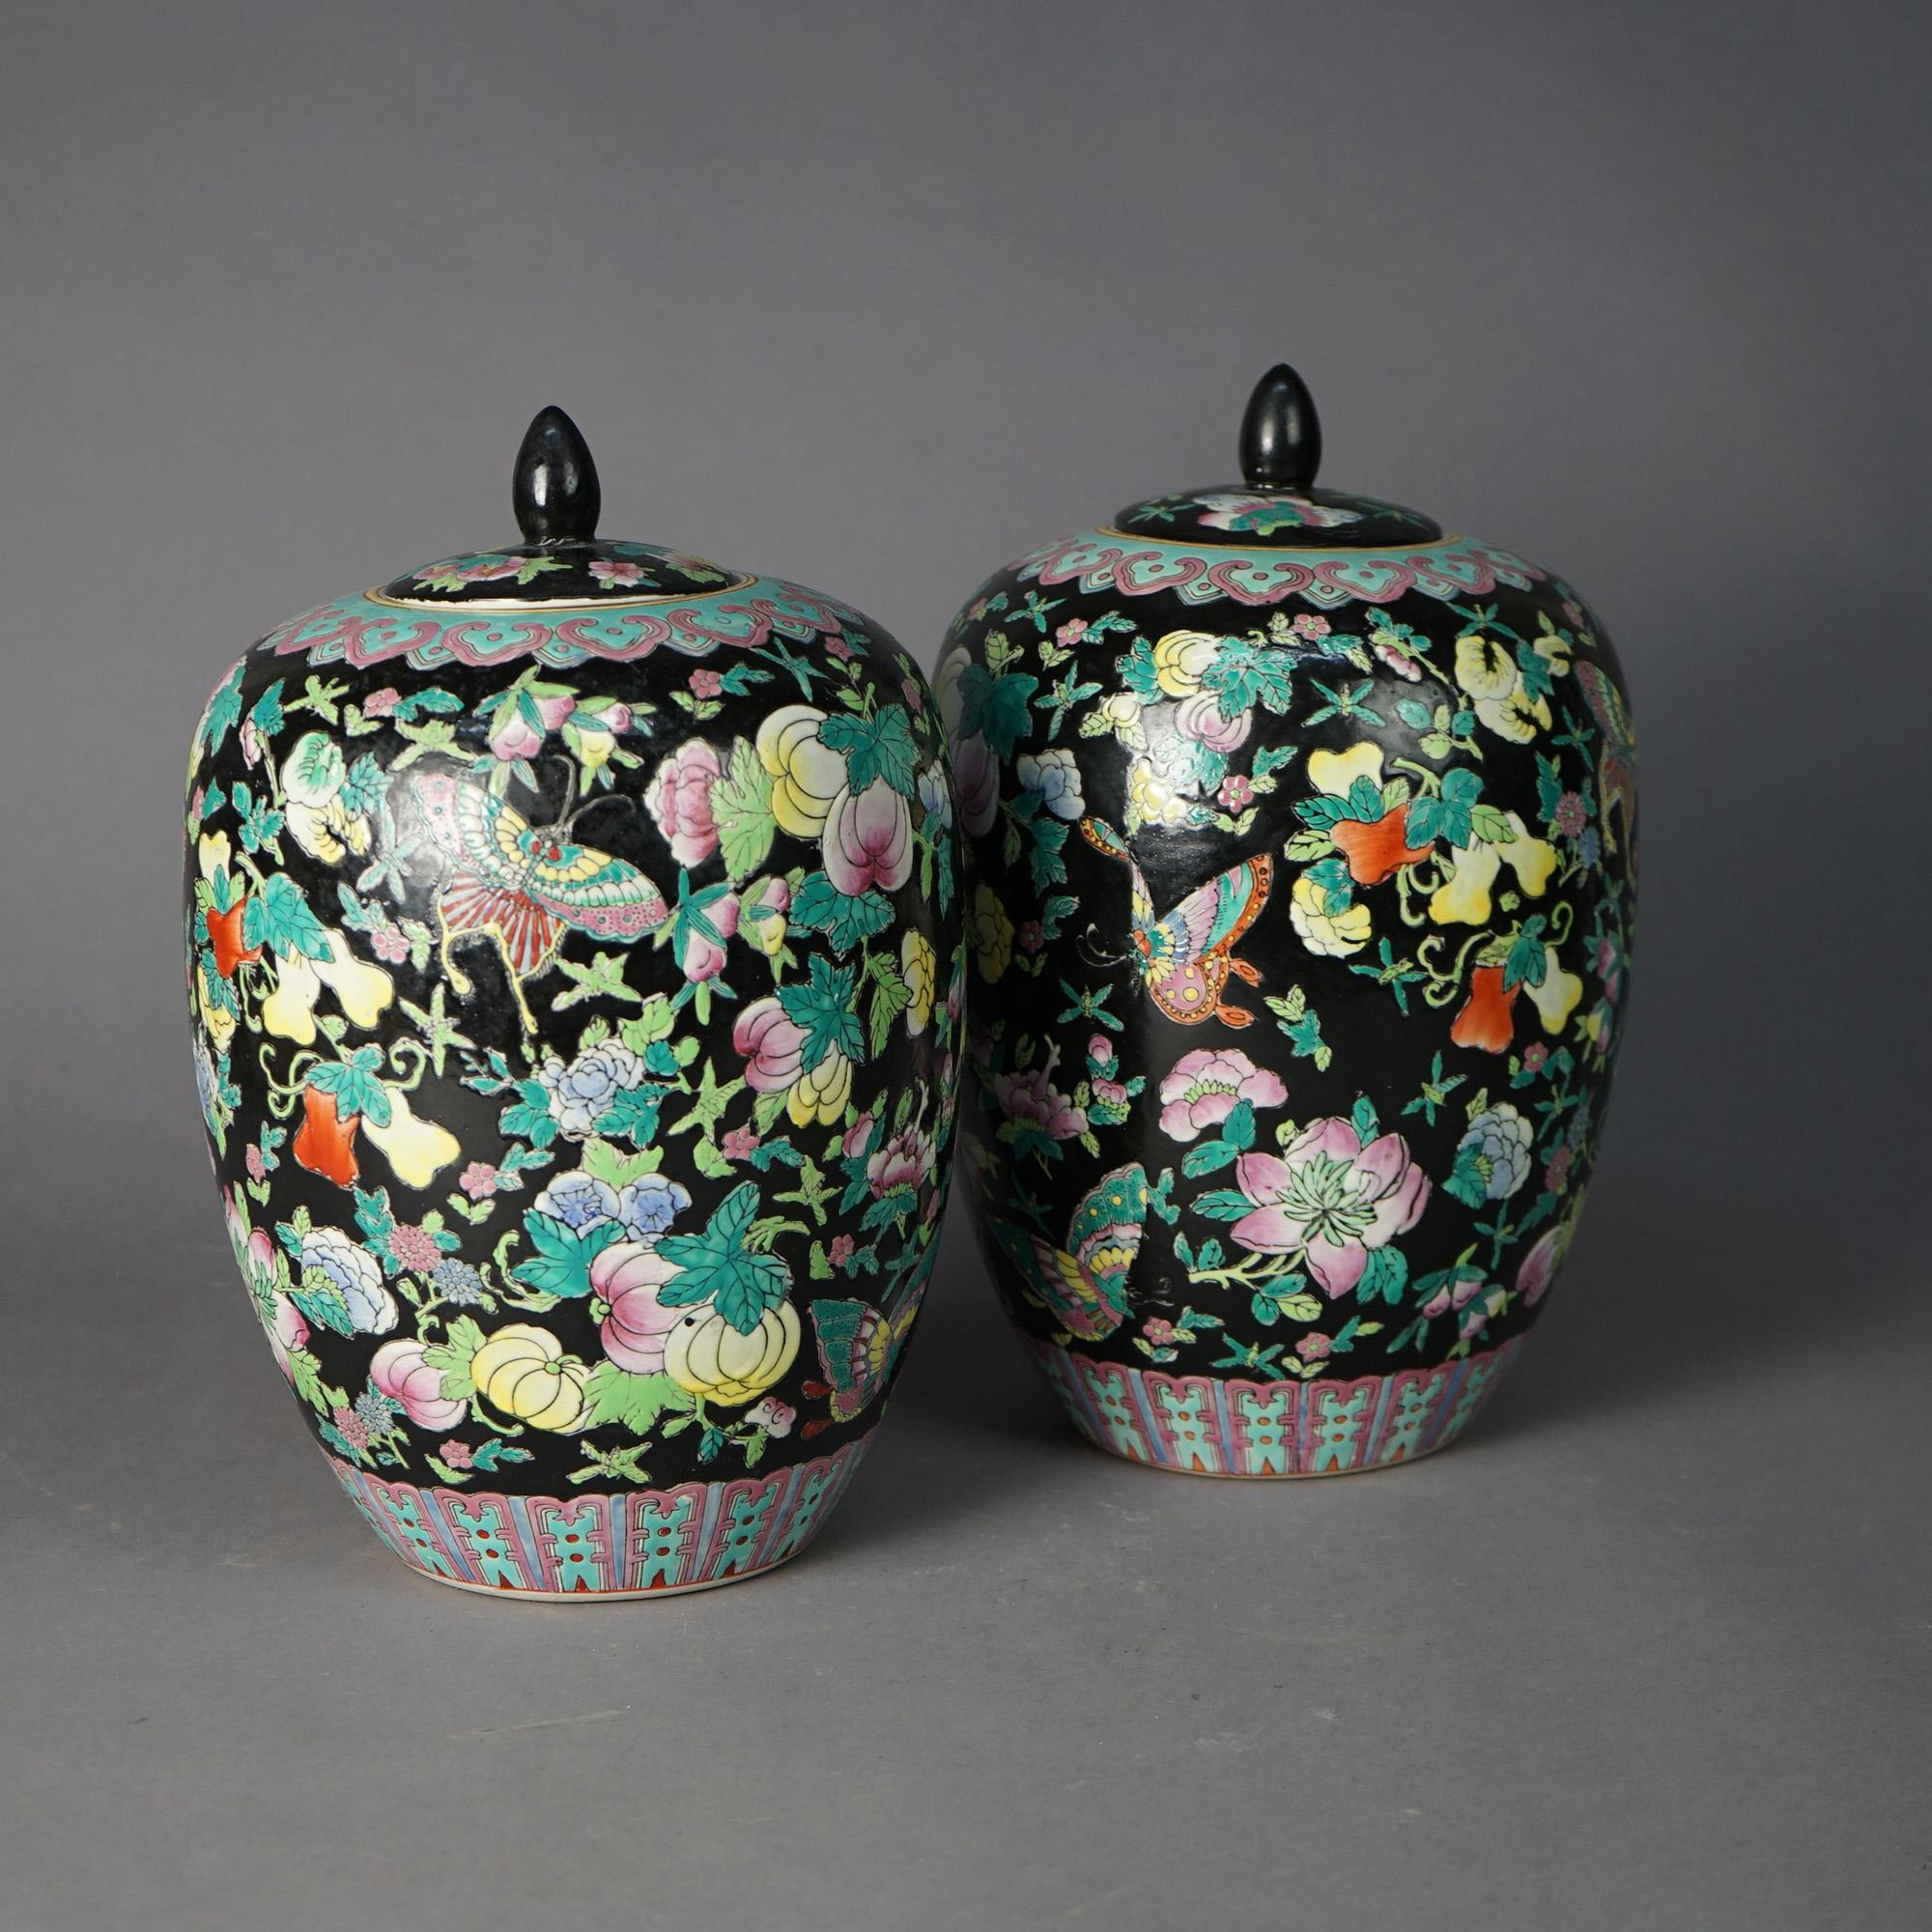 
A pair of Chinese covered ginger jars offer porcelain construction in urn form with garden design including flowers and butterflies, signed on base as photographed, 20th century

Measures - 13.75